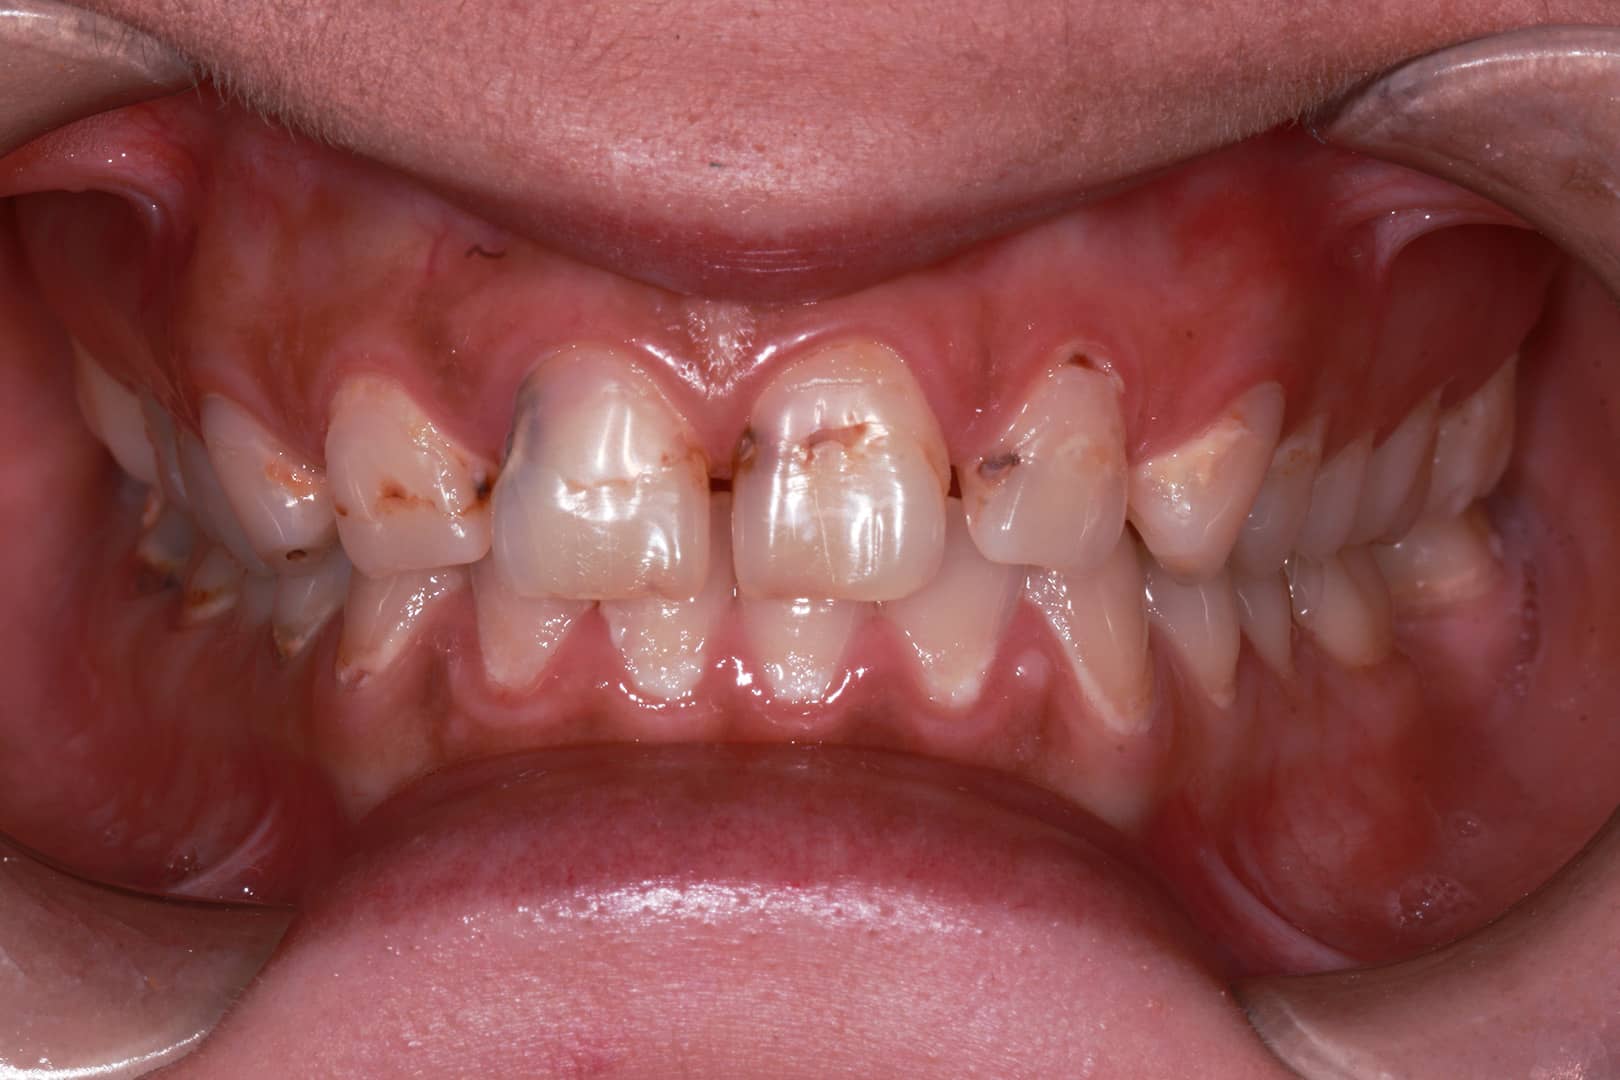 Gallery of Patient Dental Bonding Treatment Humm Payment Results See the Gallery of Before Photo